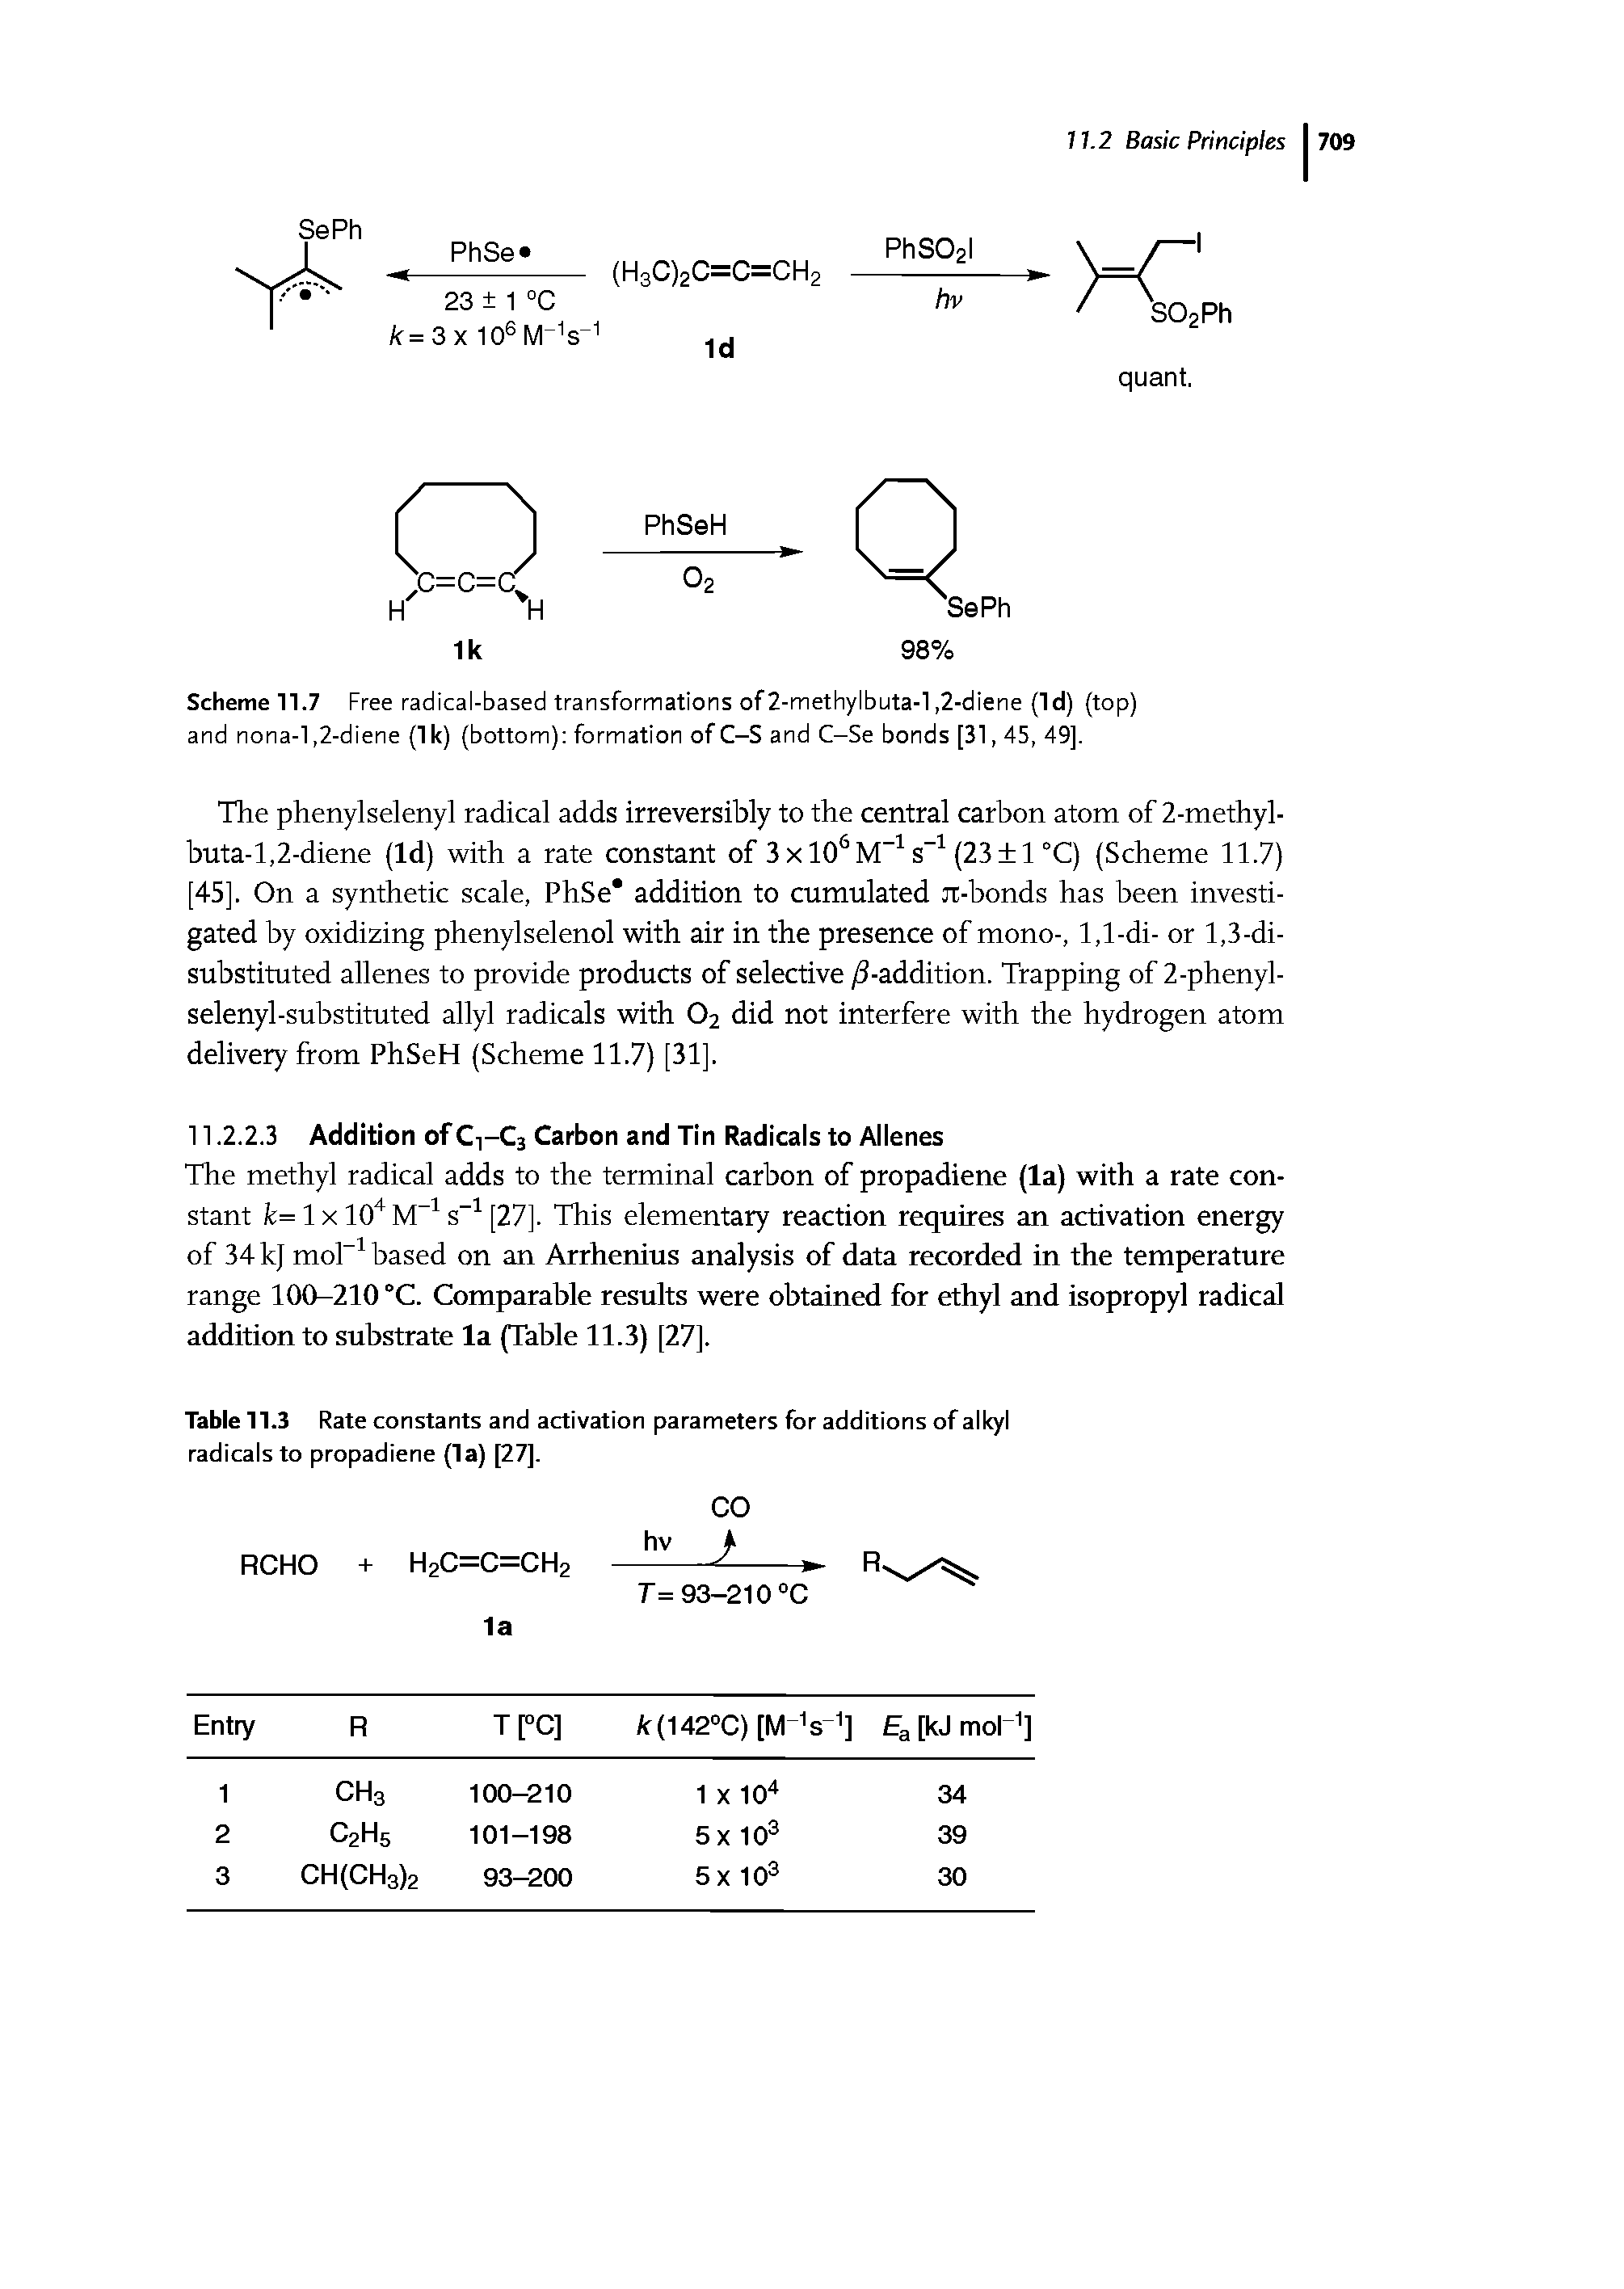 Table 11.3 Rate constants and activation parameters for additions of alkyl radicals to propadiene (la) [27],...